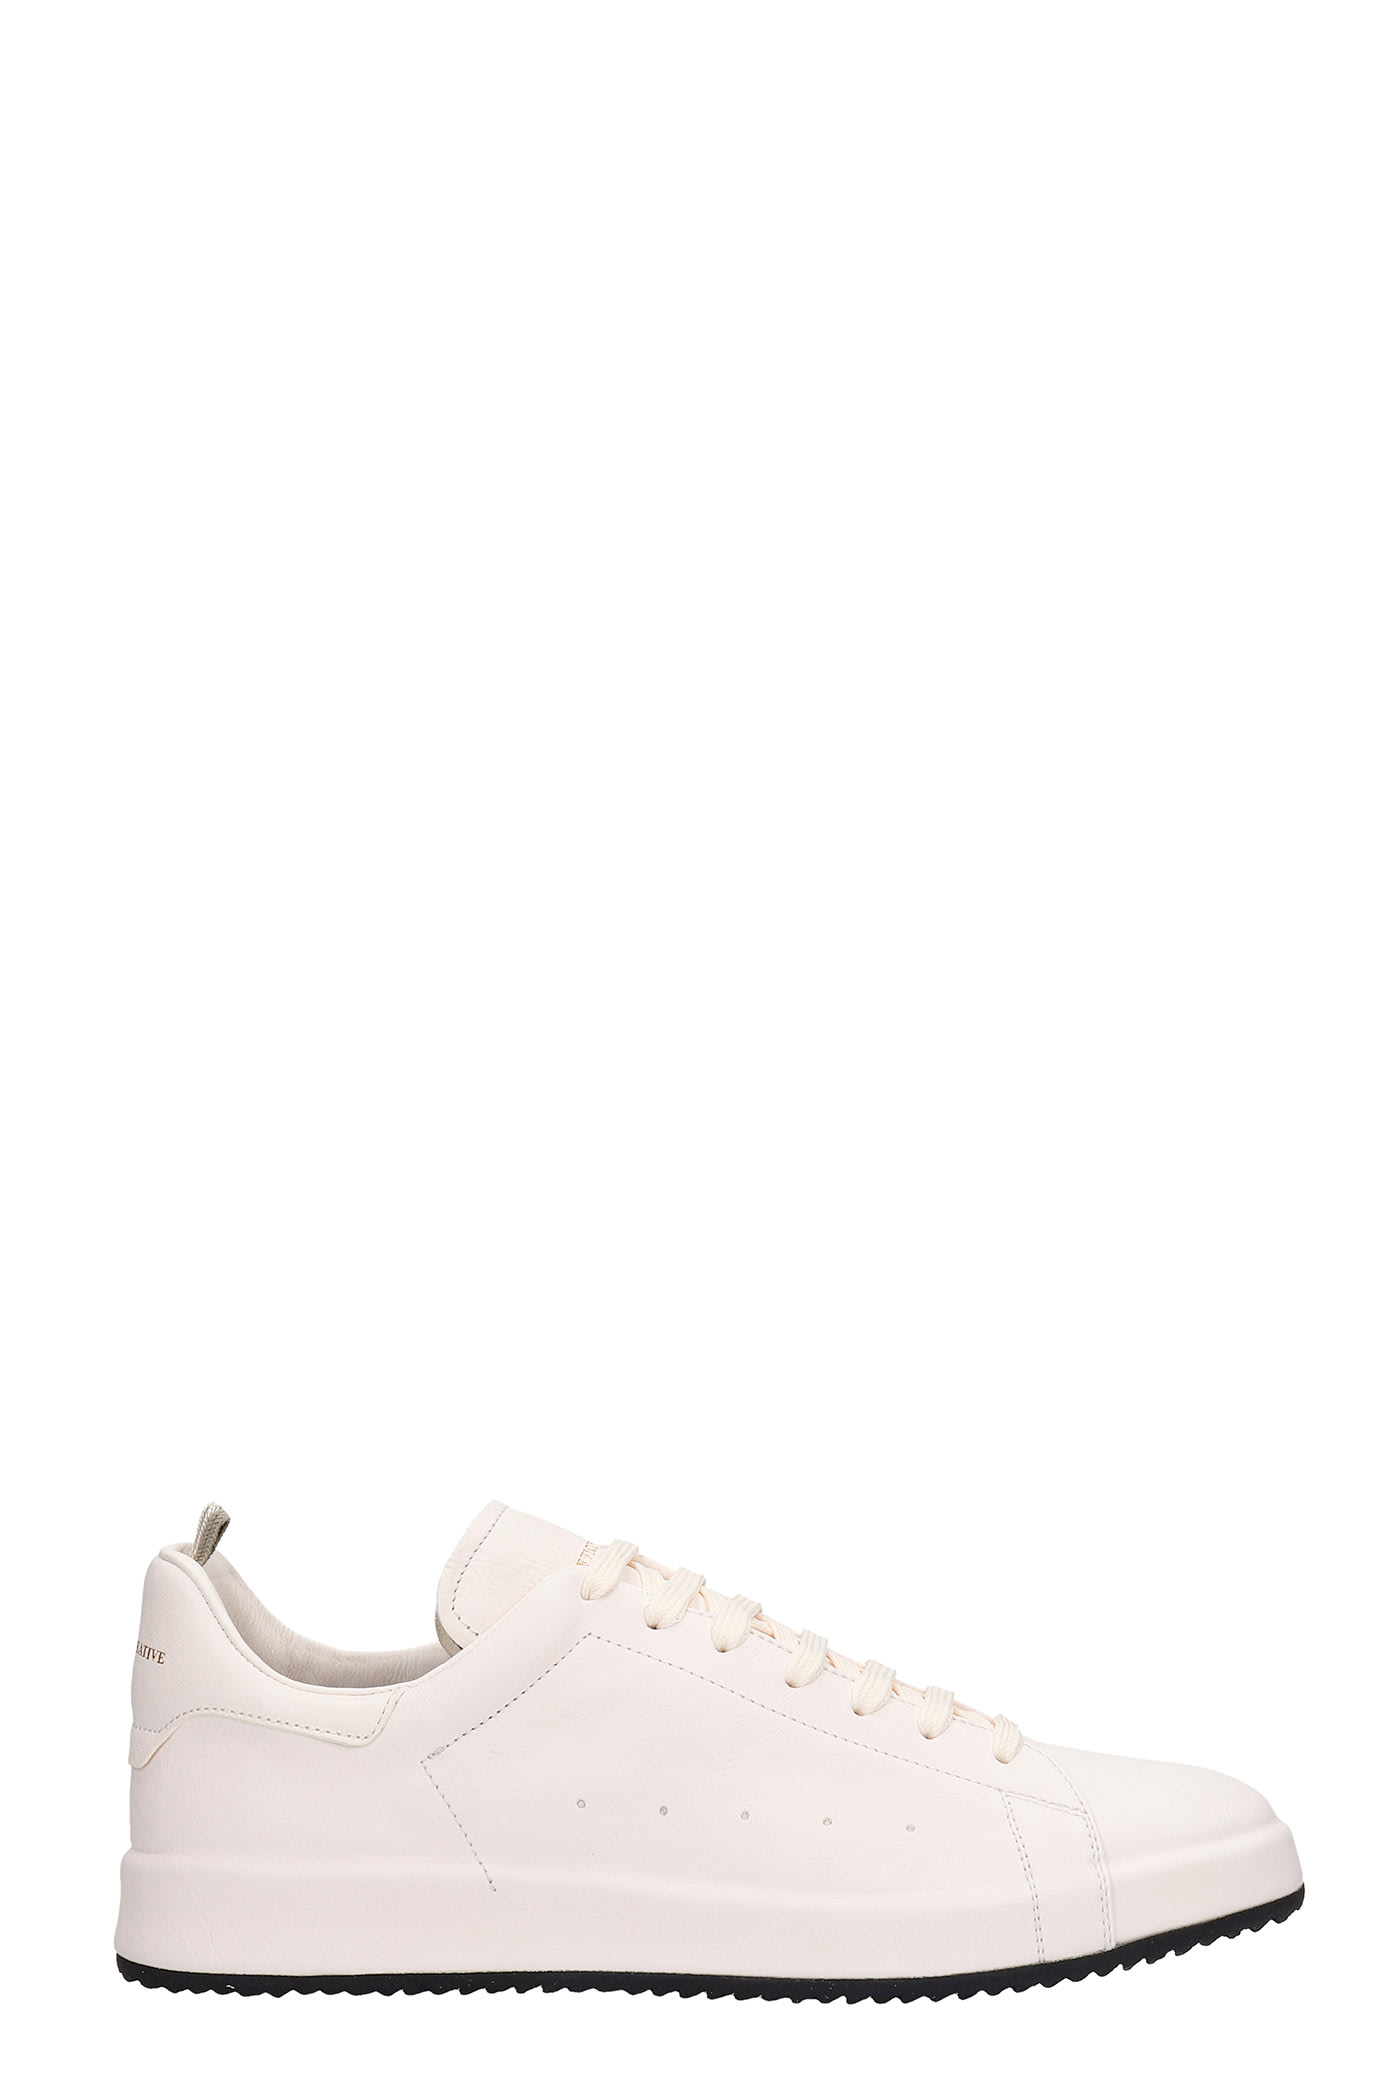 Officine Creative Ace 001 Sneakers In Rose-pink Leather